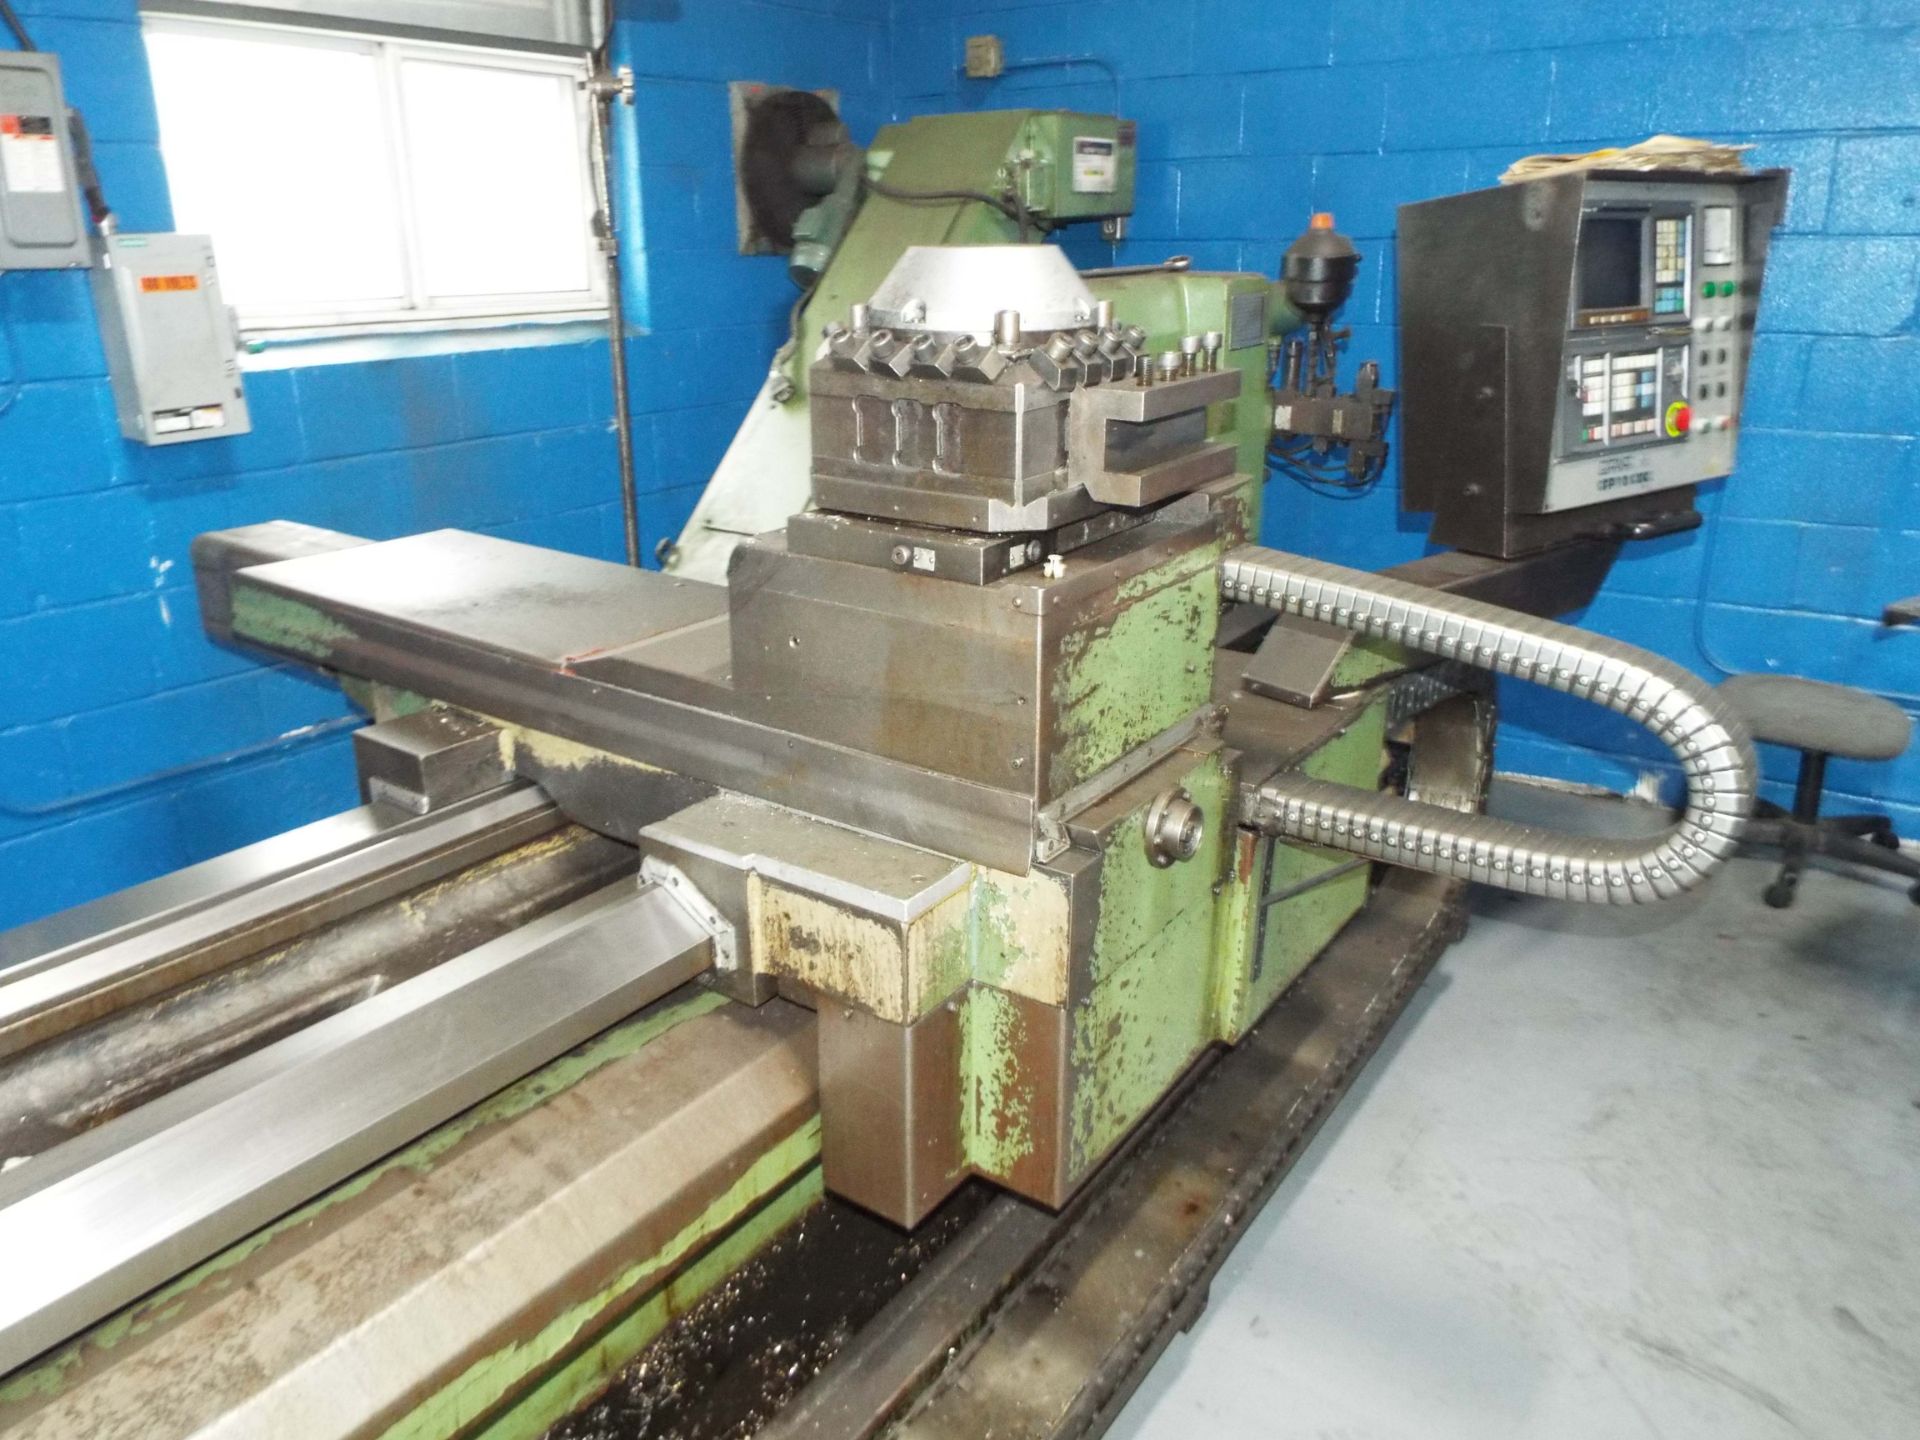 GIANA GFP 10 CNC LATHE WITH GE FANUC OT CNC CONTROL, 20" SWING OVER BED, 156" BETWEEN CENTERS, 4.75" - Image 5 of 11